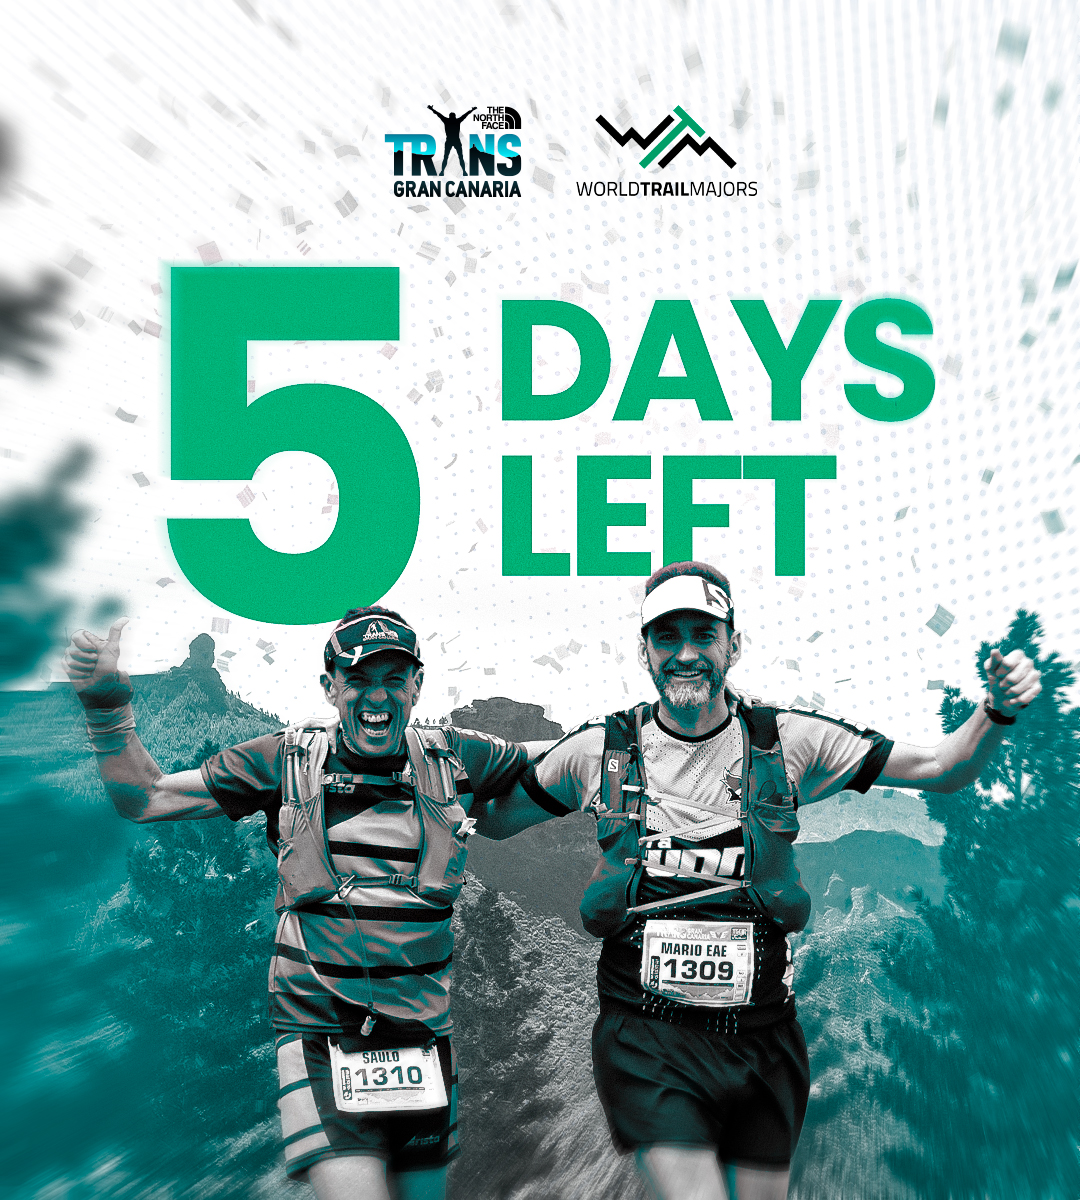 ❗️𝐎𝐧𝐥𝐲 𝟓 𝐃𝐚𝐲𝐬 left until the next World Trail Majors challenge! 🌍 Get ready for @TransGC , the third epic race of the circuit ⛰️

Happening from February 21st to 25th, #GranCanaria, Spain. Are you prepared to conquer? #WorldTrailMajors 🇪🇸✨